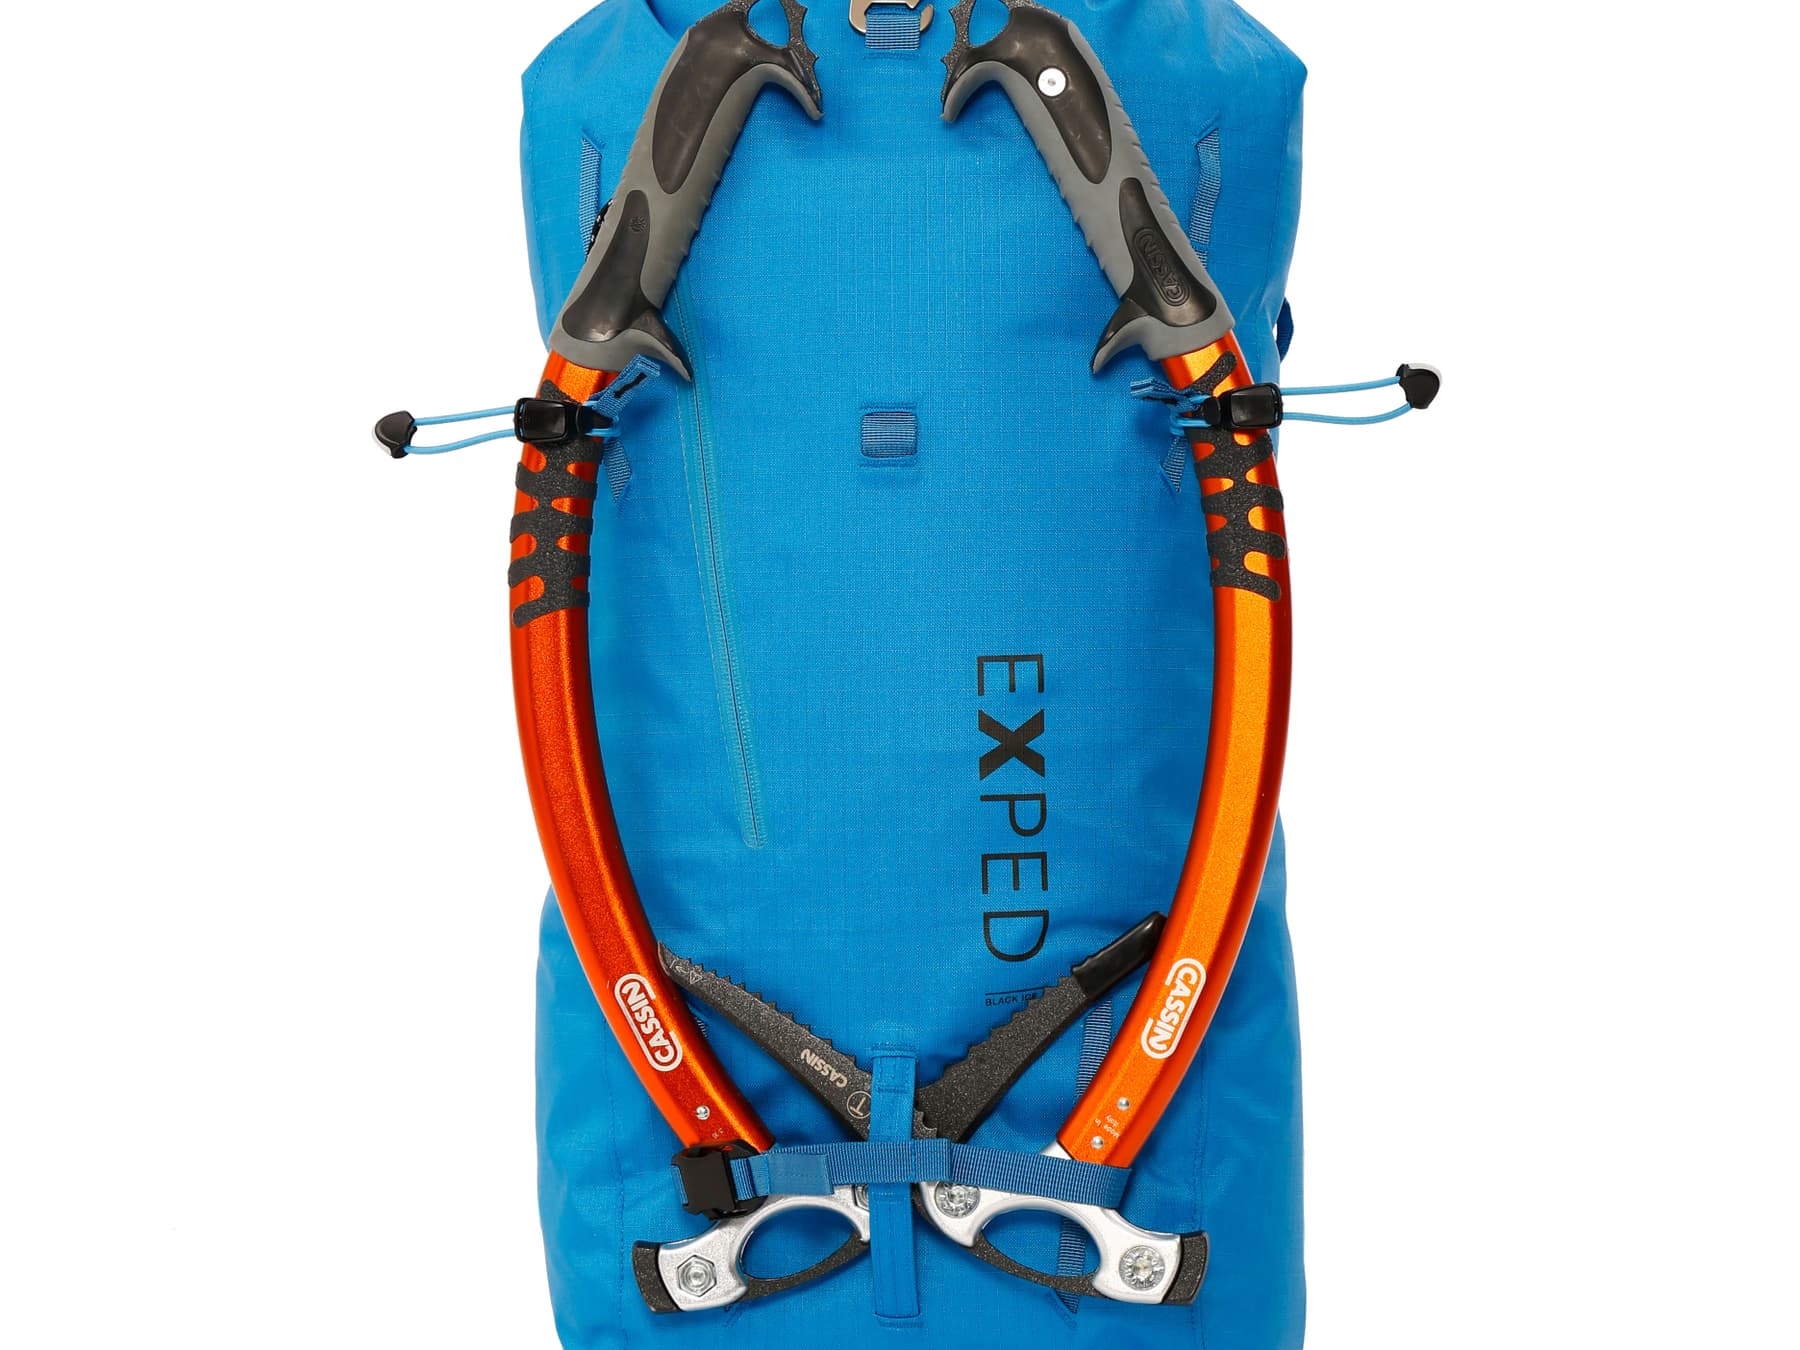 Exped Couloir 30 black ski touring backpack 